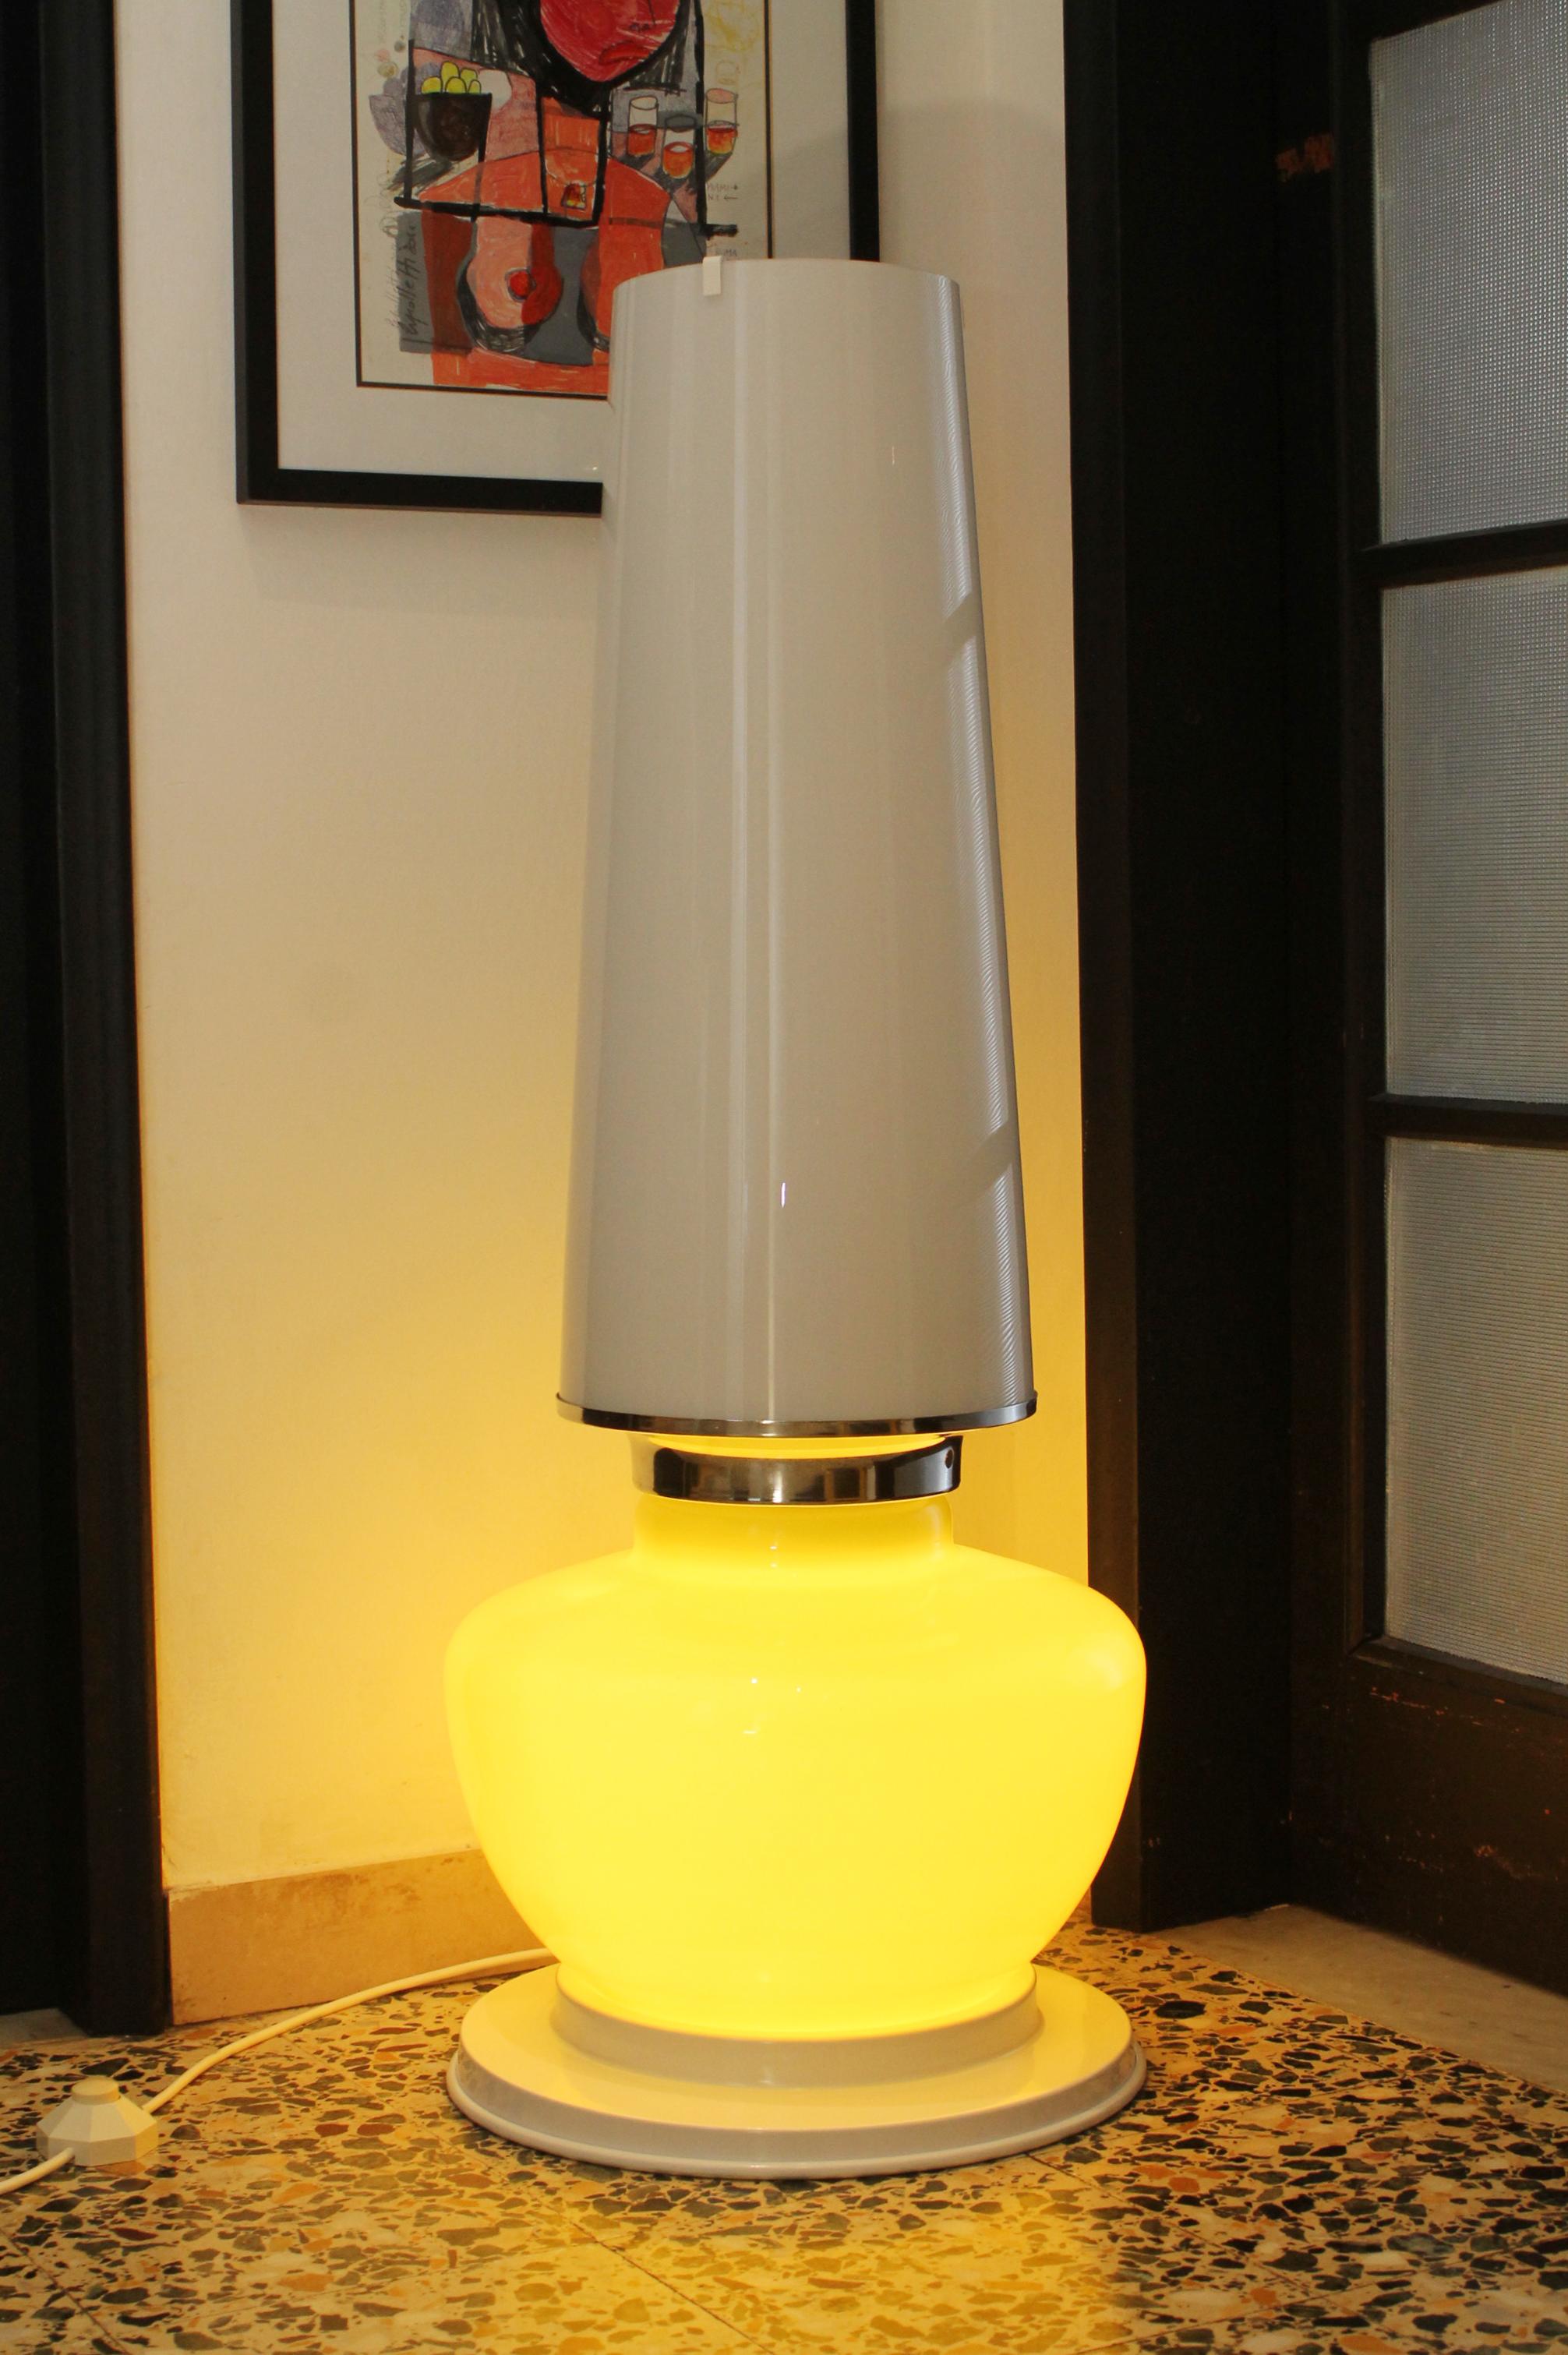 The 1960s supersized (100height x Ø 40cm) retro décor original  mid-century floor/table glass lamp
(*could easily be displayed in an important console or great side table as well for sure)

Original octagonal power switch (3-way by Vimar) which